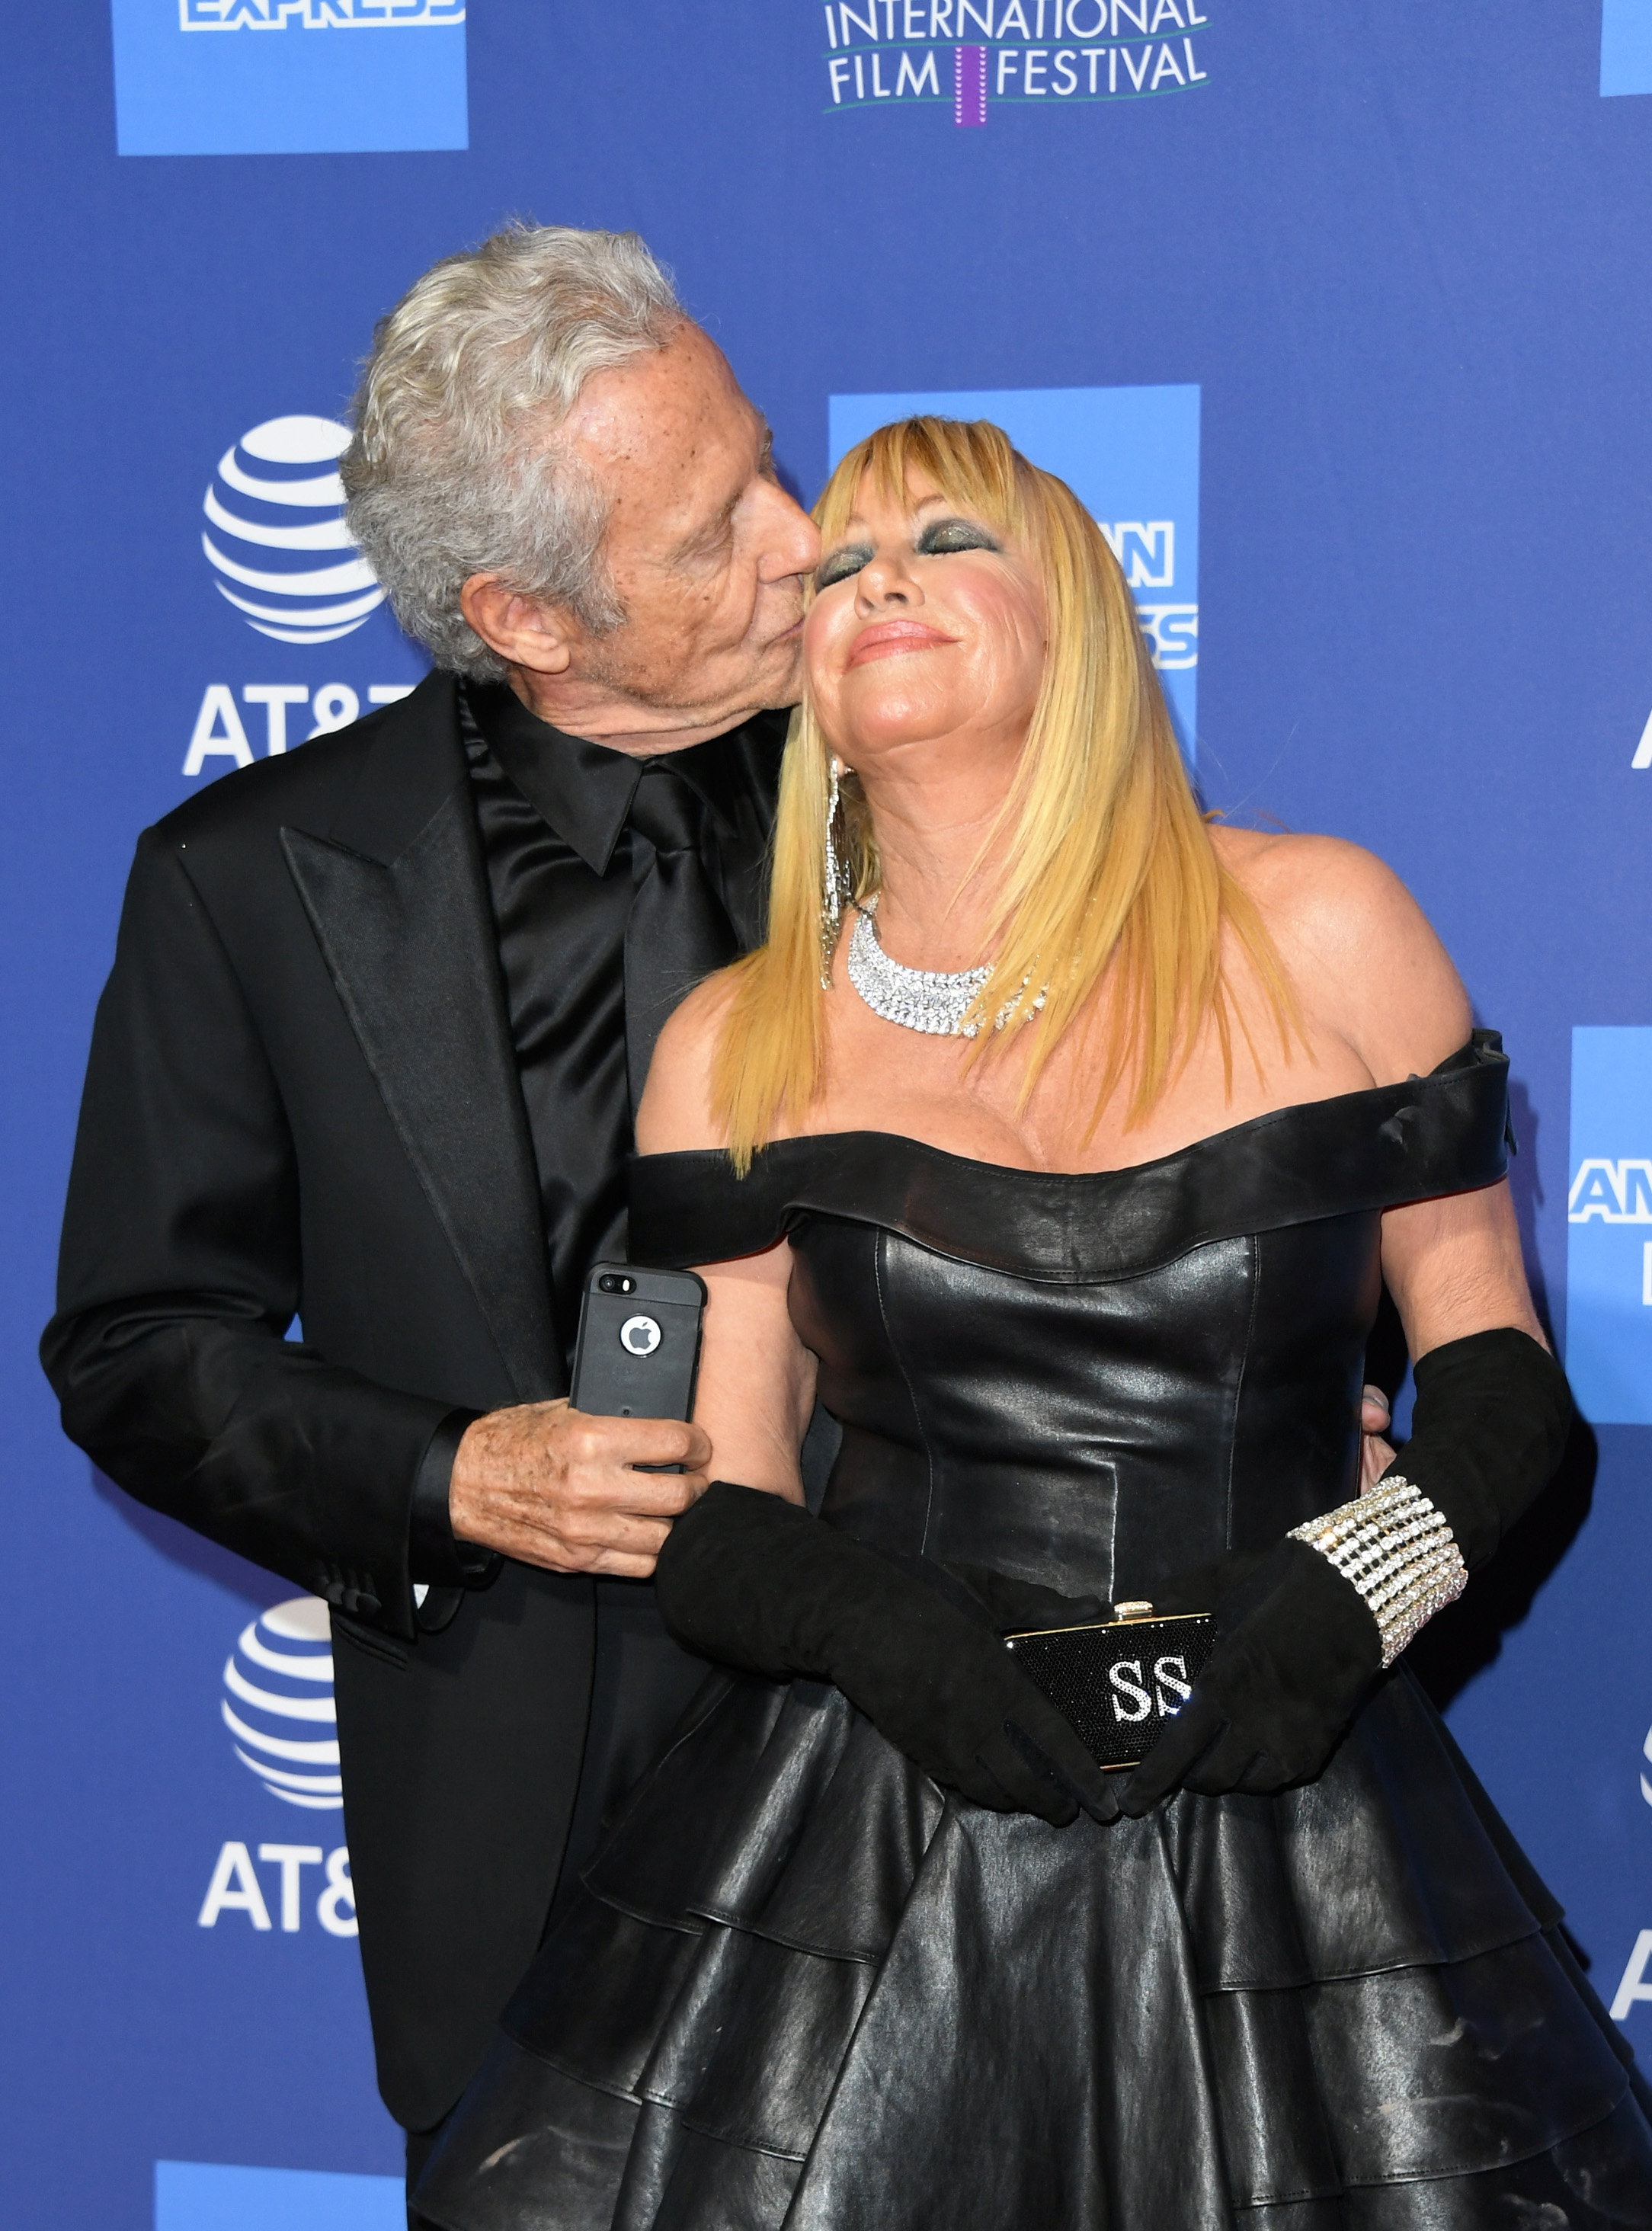 Alan Hamel und Suzanne Somers bei der Search the world's best editorial photos Editorial Images Images Creative Editorial Video Creative Editorial 30th Annual Palm Springs International Film Festival Film Awards Gala | Source: Getty Images